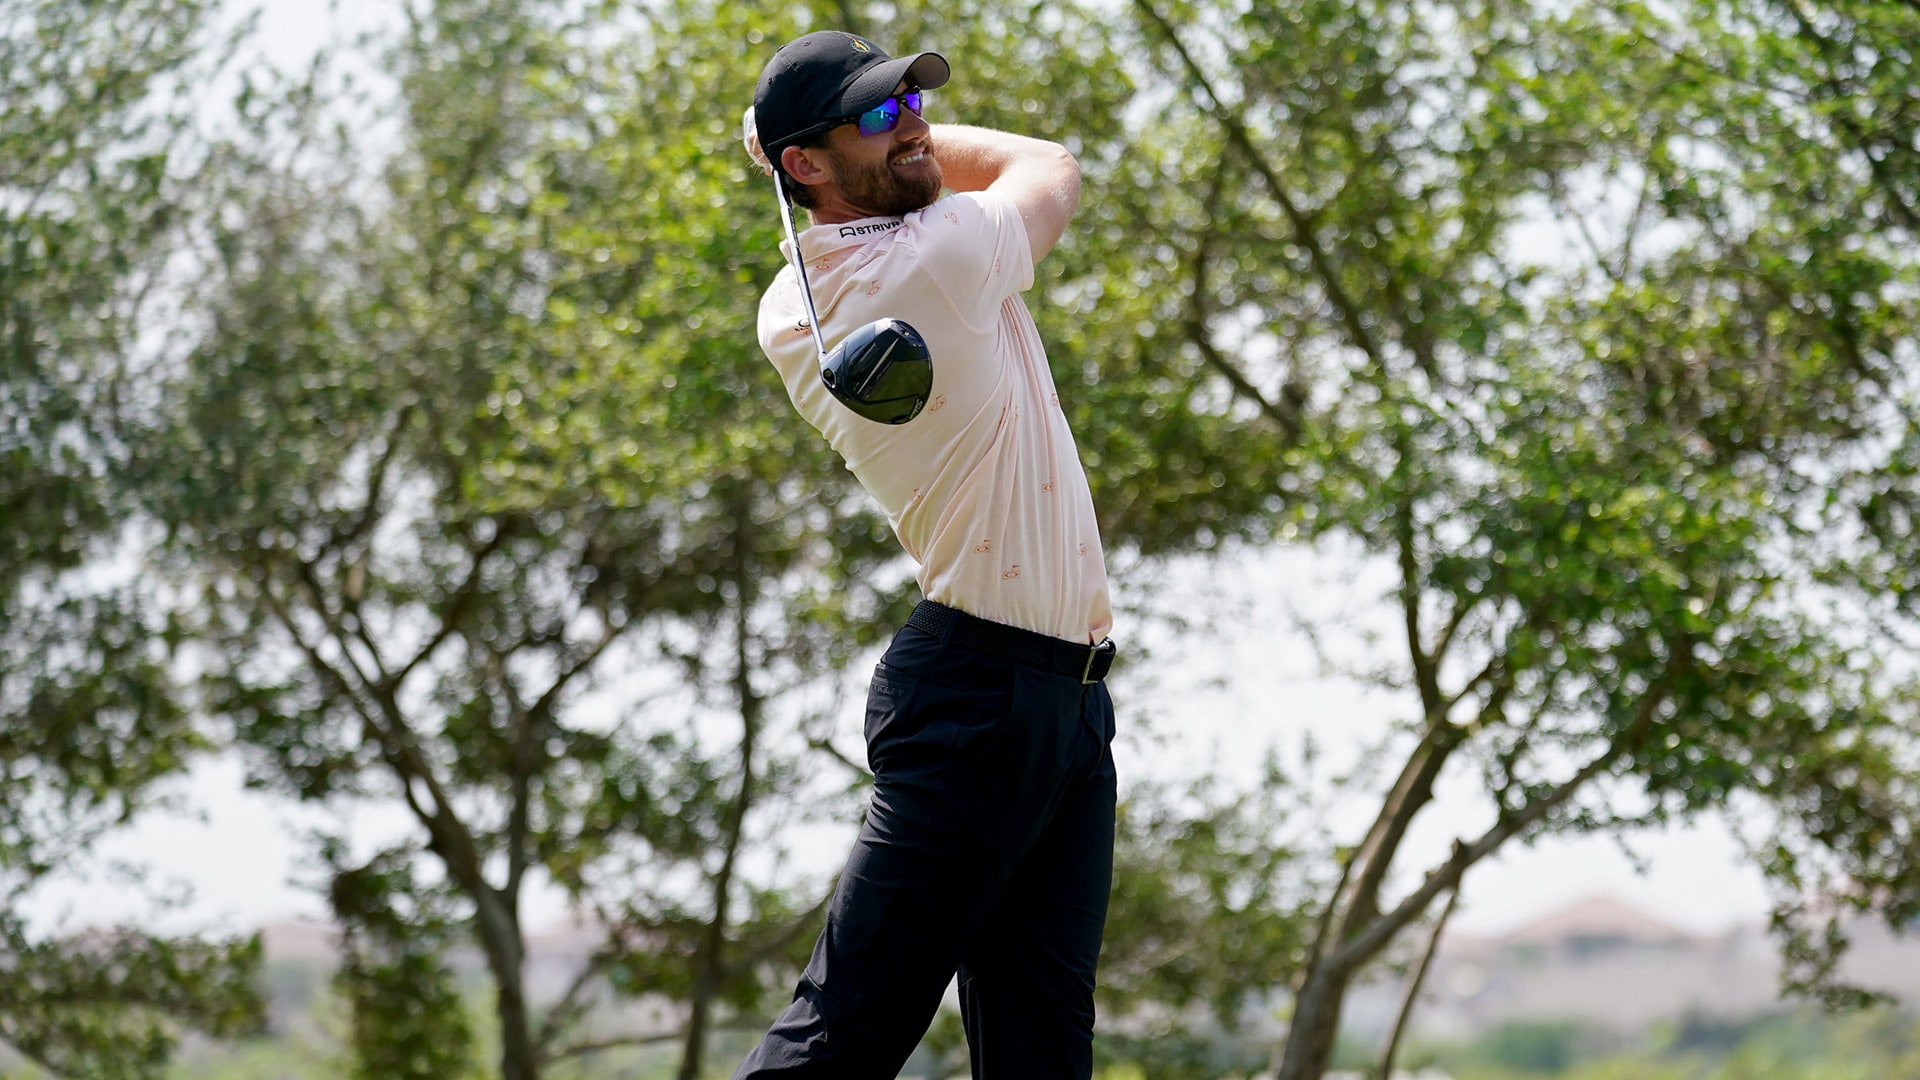 Patrick Rodgers, seeking first Tour win, takes 3-shot lead at Valero Texas Open